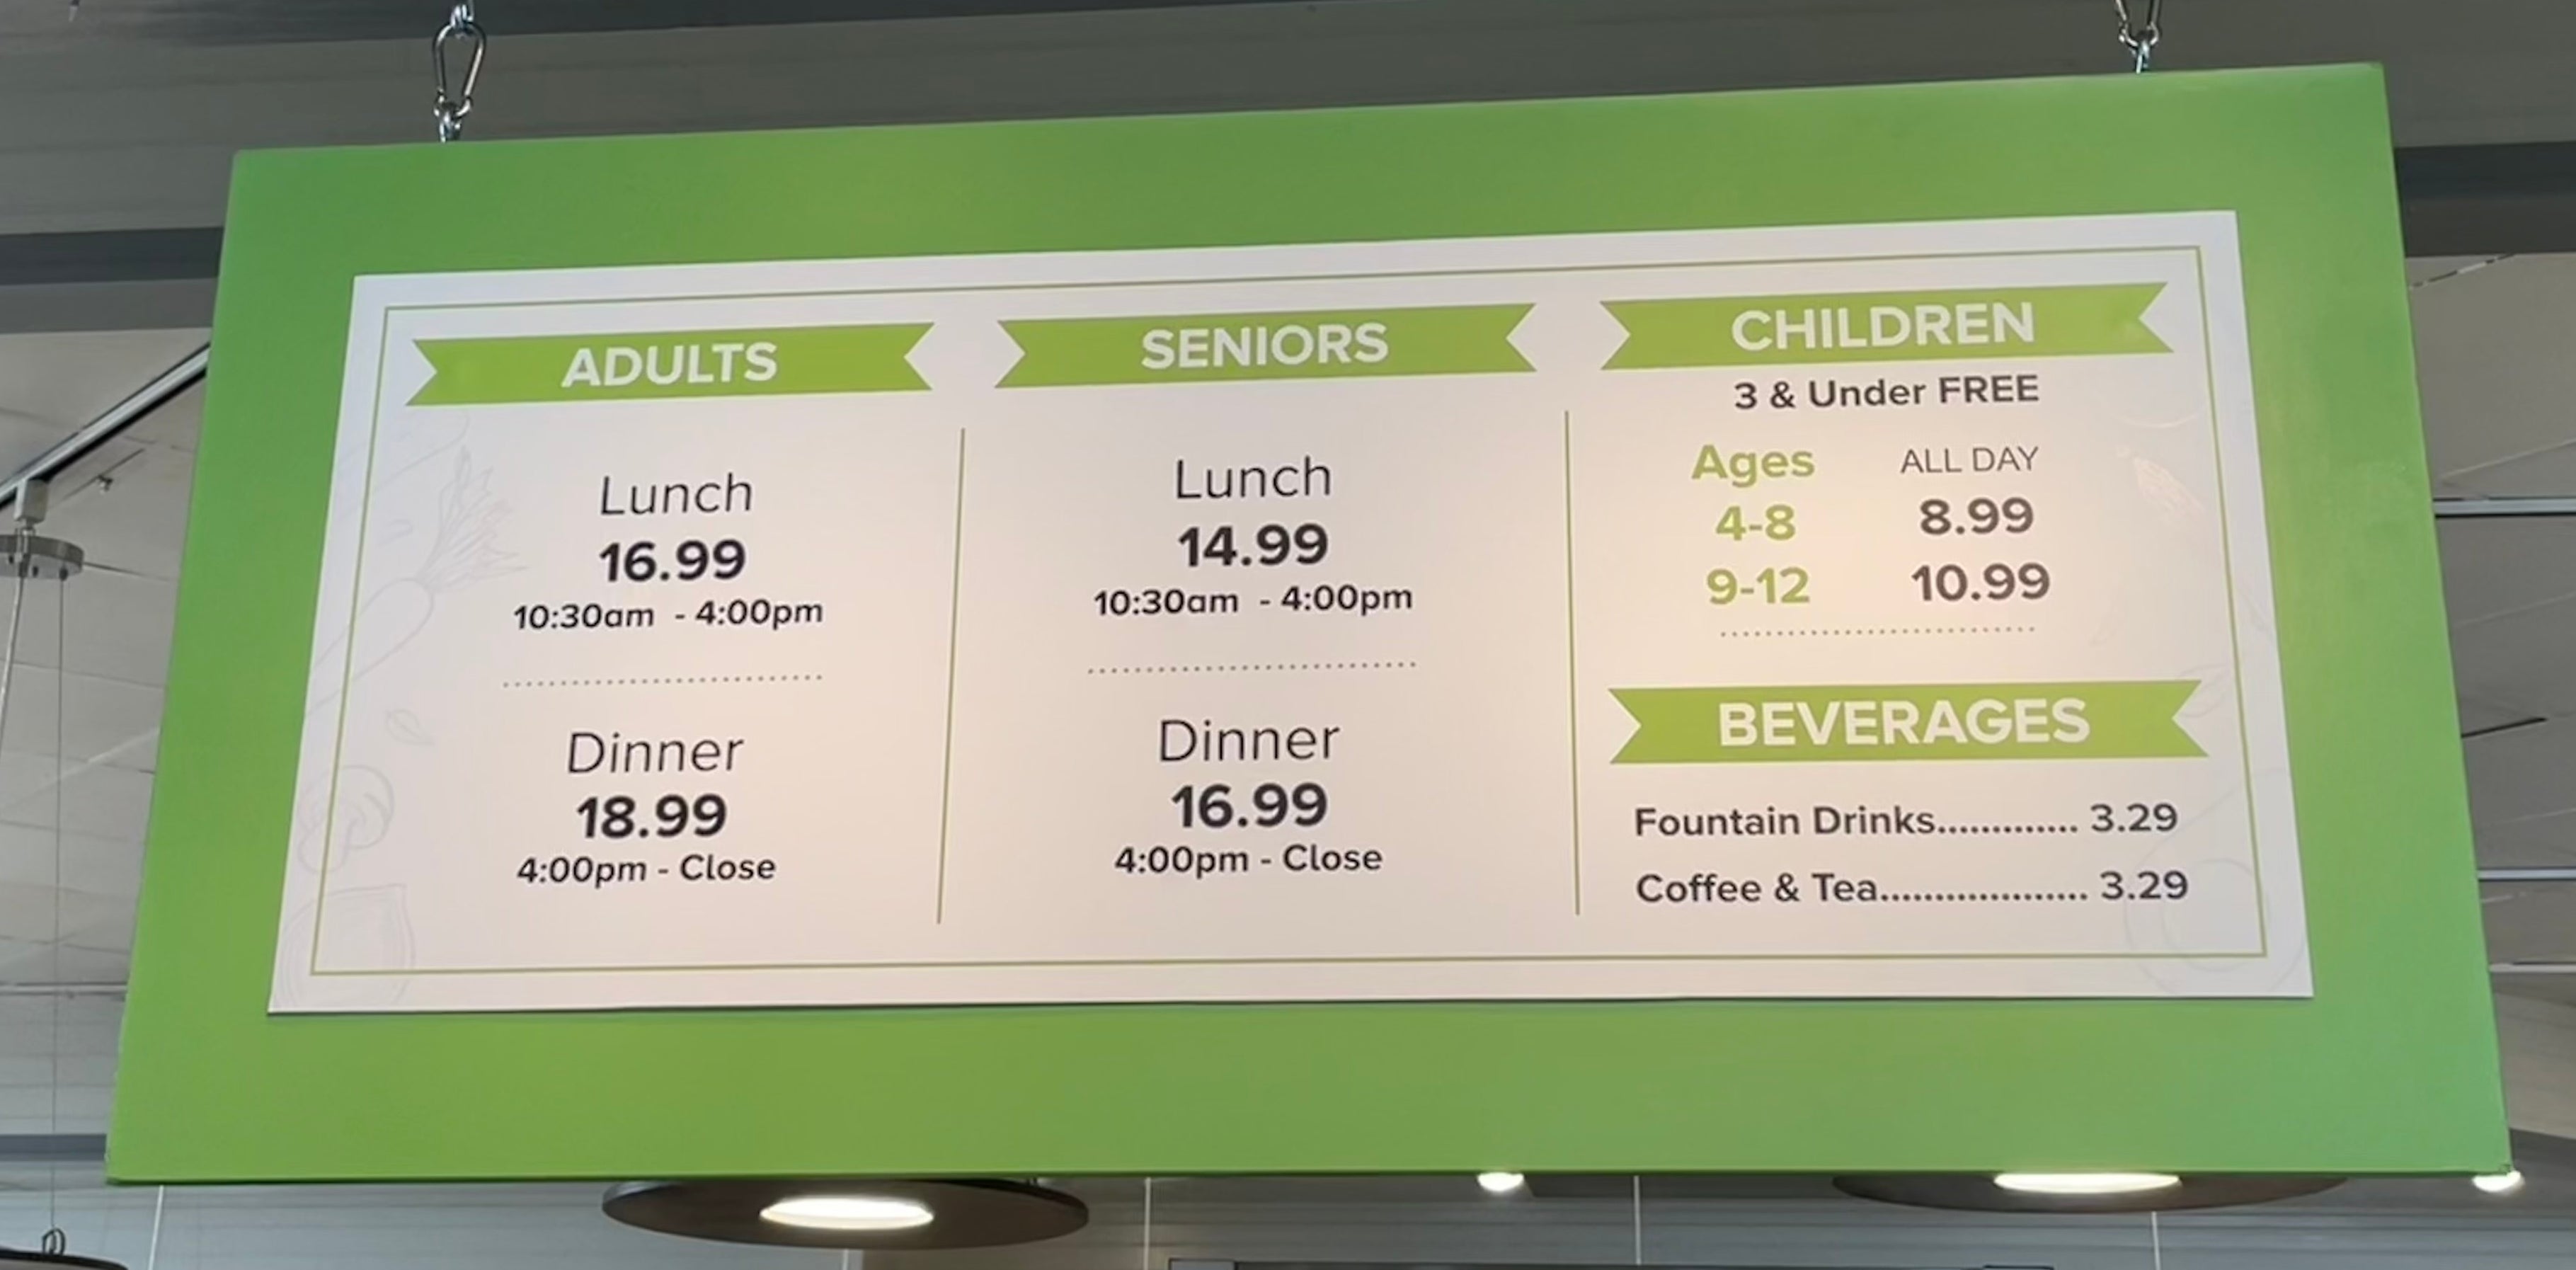 Menu sign with prices for adults, seniors, and children for lunch and dinner; includes beverage prices